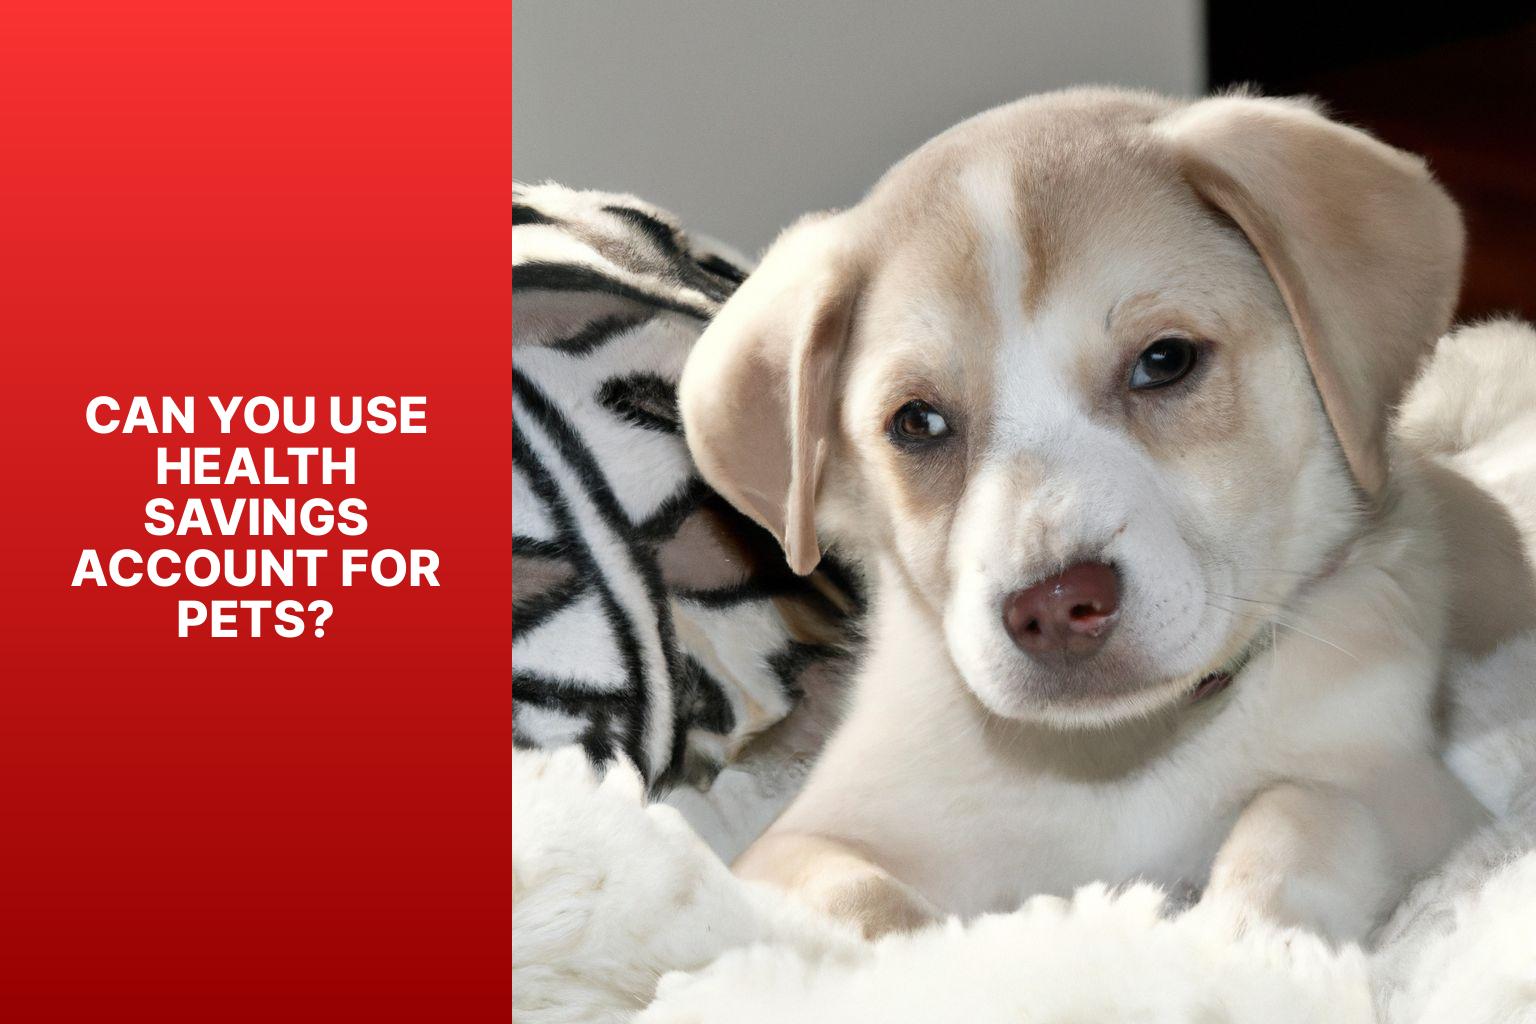 Can You Use Health Savings Account for Pets? - Using Health Savings Account for Pets: Is It Possible? 